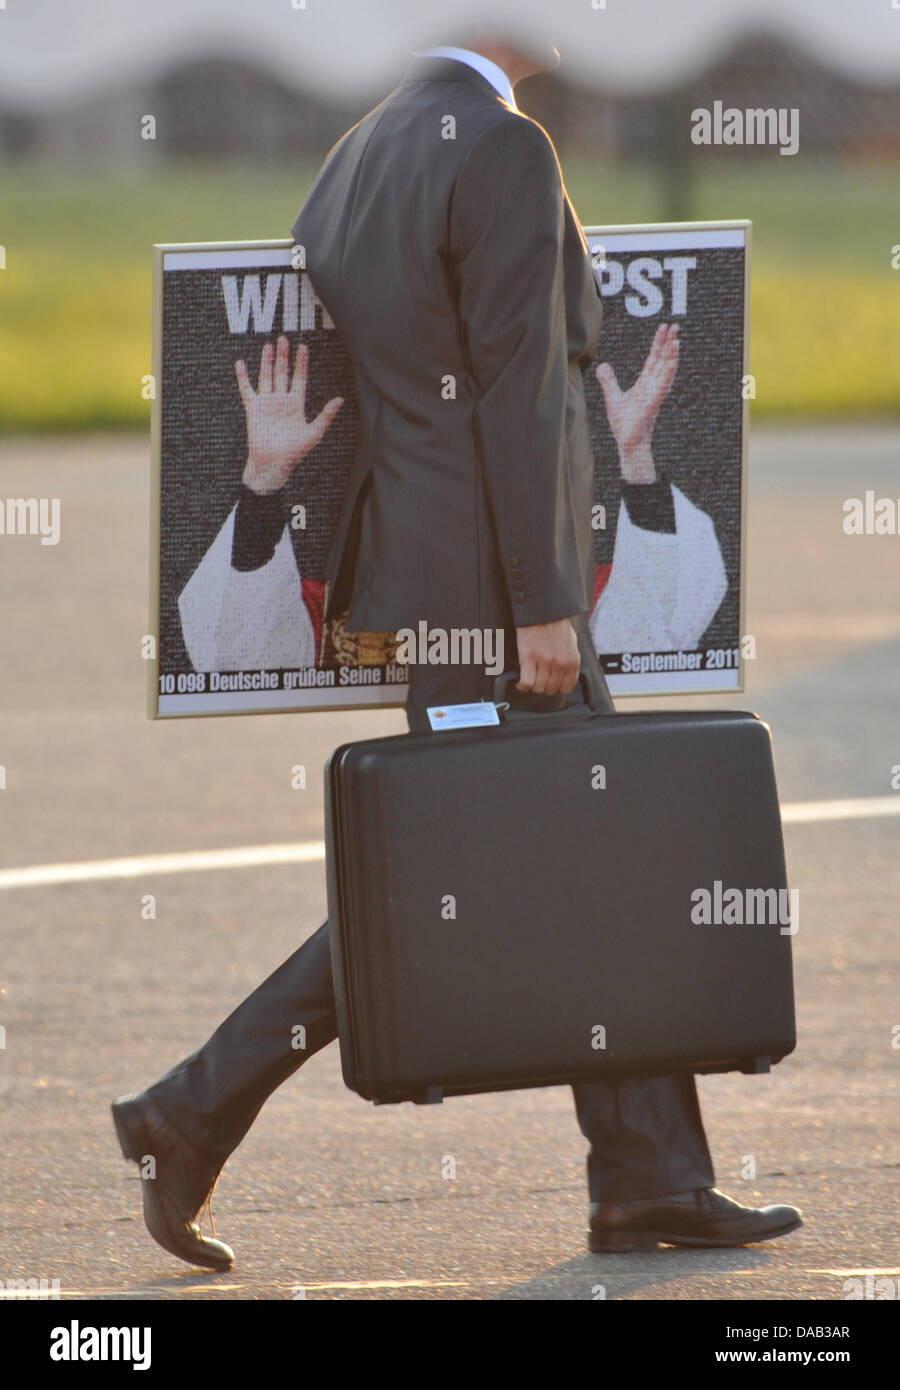 A man holding his suitcase and a portrait picture of Pope Benedict XVI at the Black Forest airport in Lahr, Germany, 25 September 2011. The head of the Roman Catholic Church is visiting Germany from 22-25 September 2011. Foto: Uli Deck dpa/lsw Stock Photo